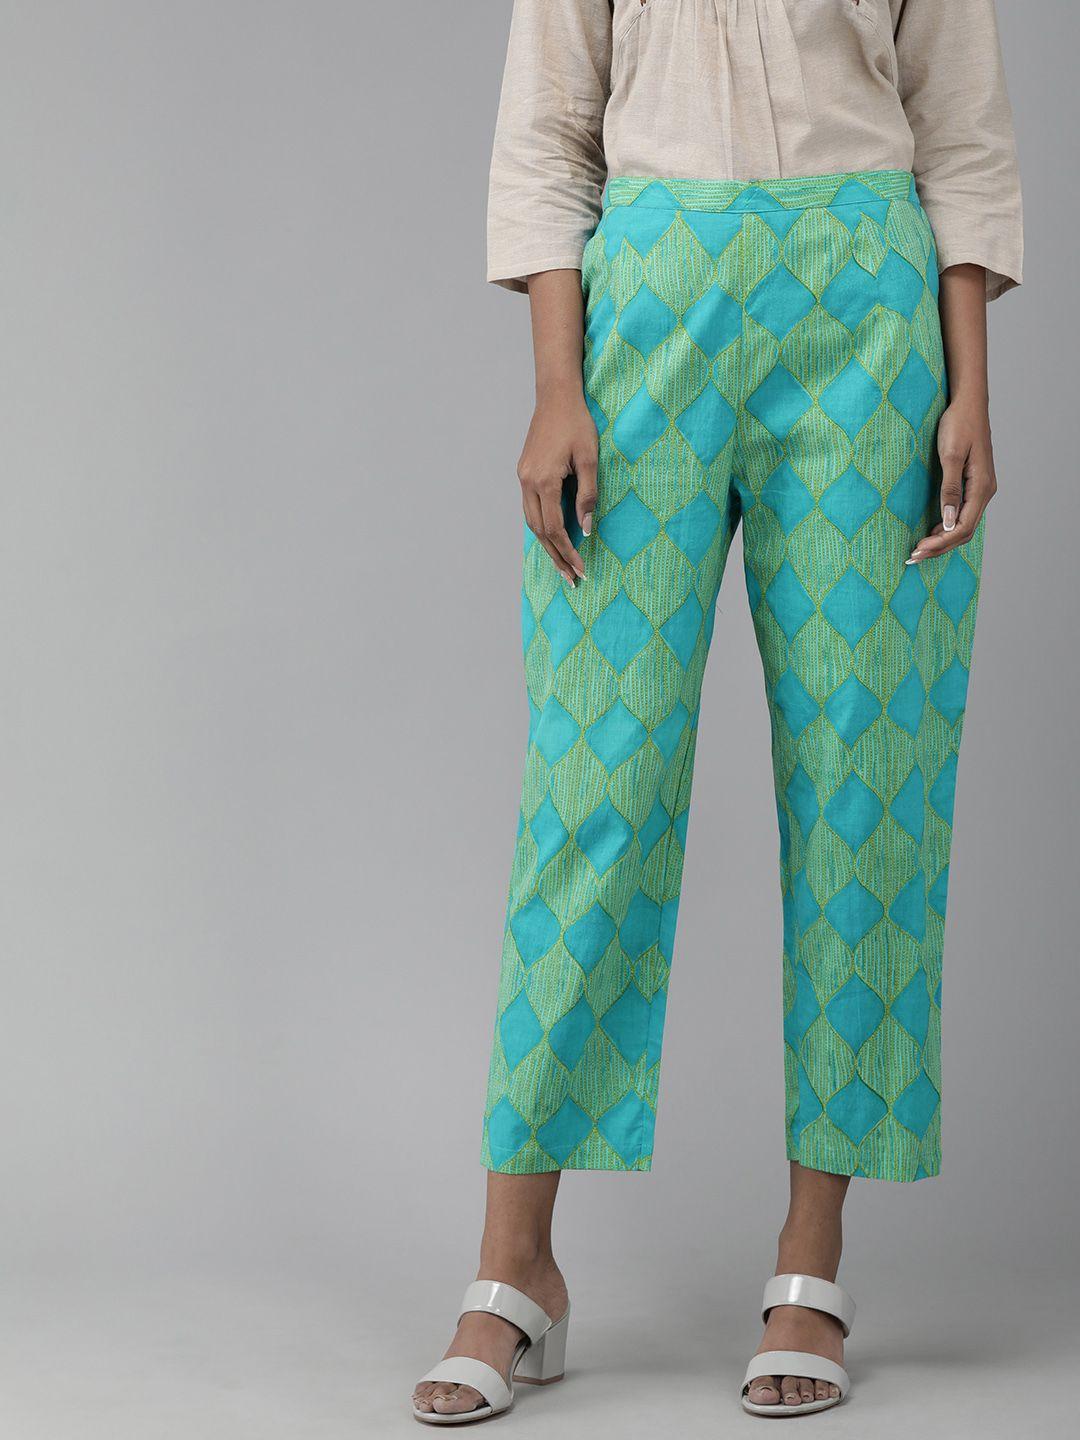 indo era women green & turquoise blue printed straight cropped palazzos